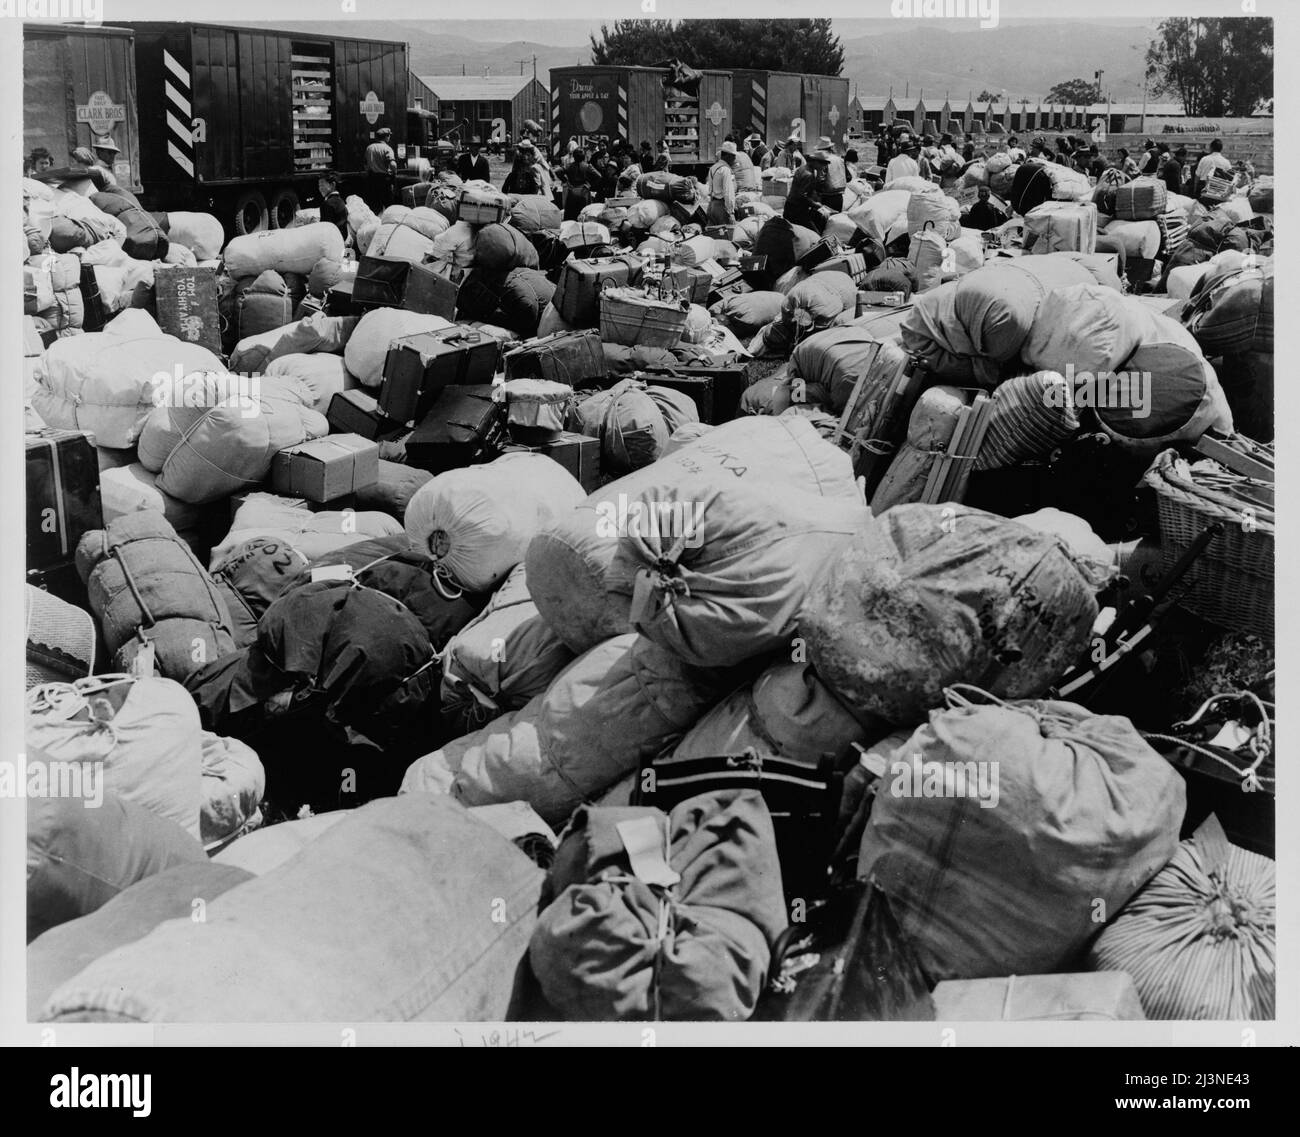 Japanese relocation, California. Baggage belonging to evacuees of Japanese ancestry at an assembly center in Salinas, California, prior to a War Relocation Authority center. Stock Photo